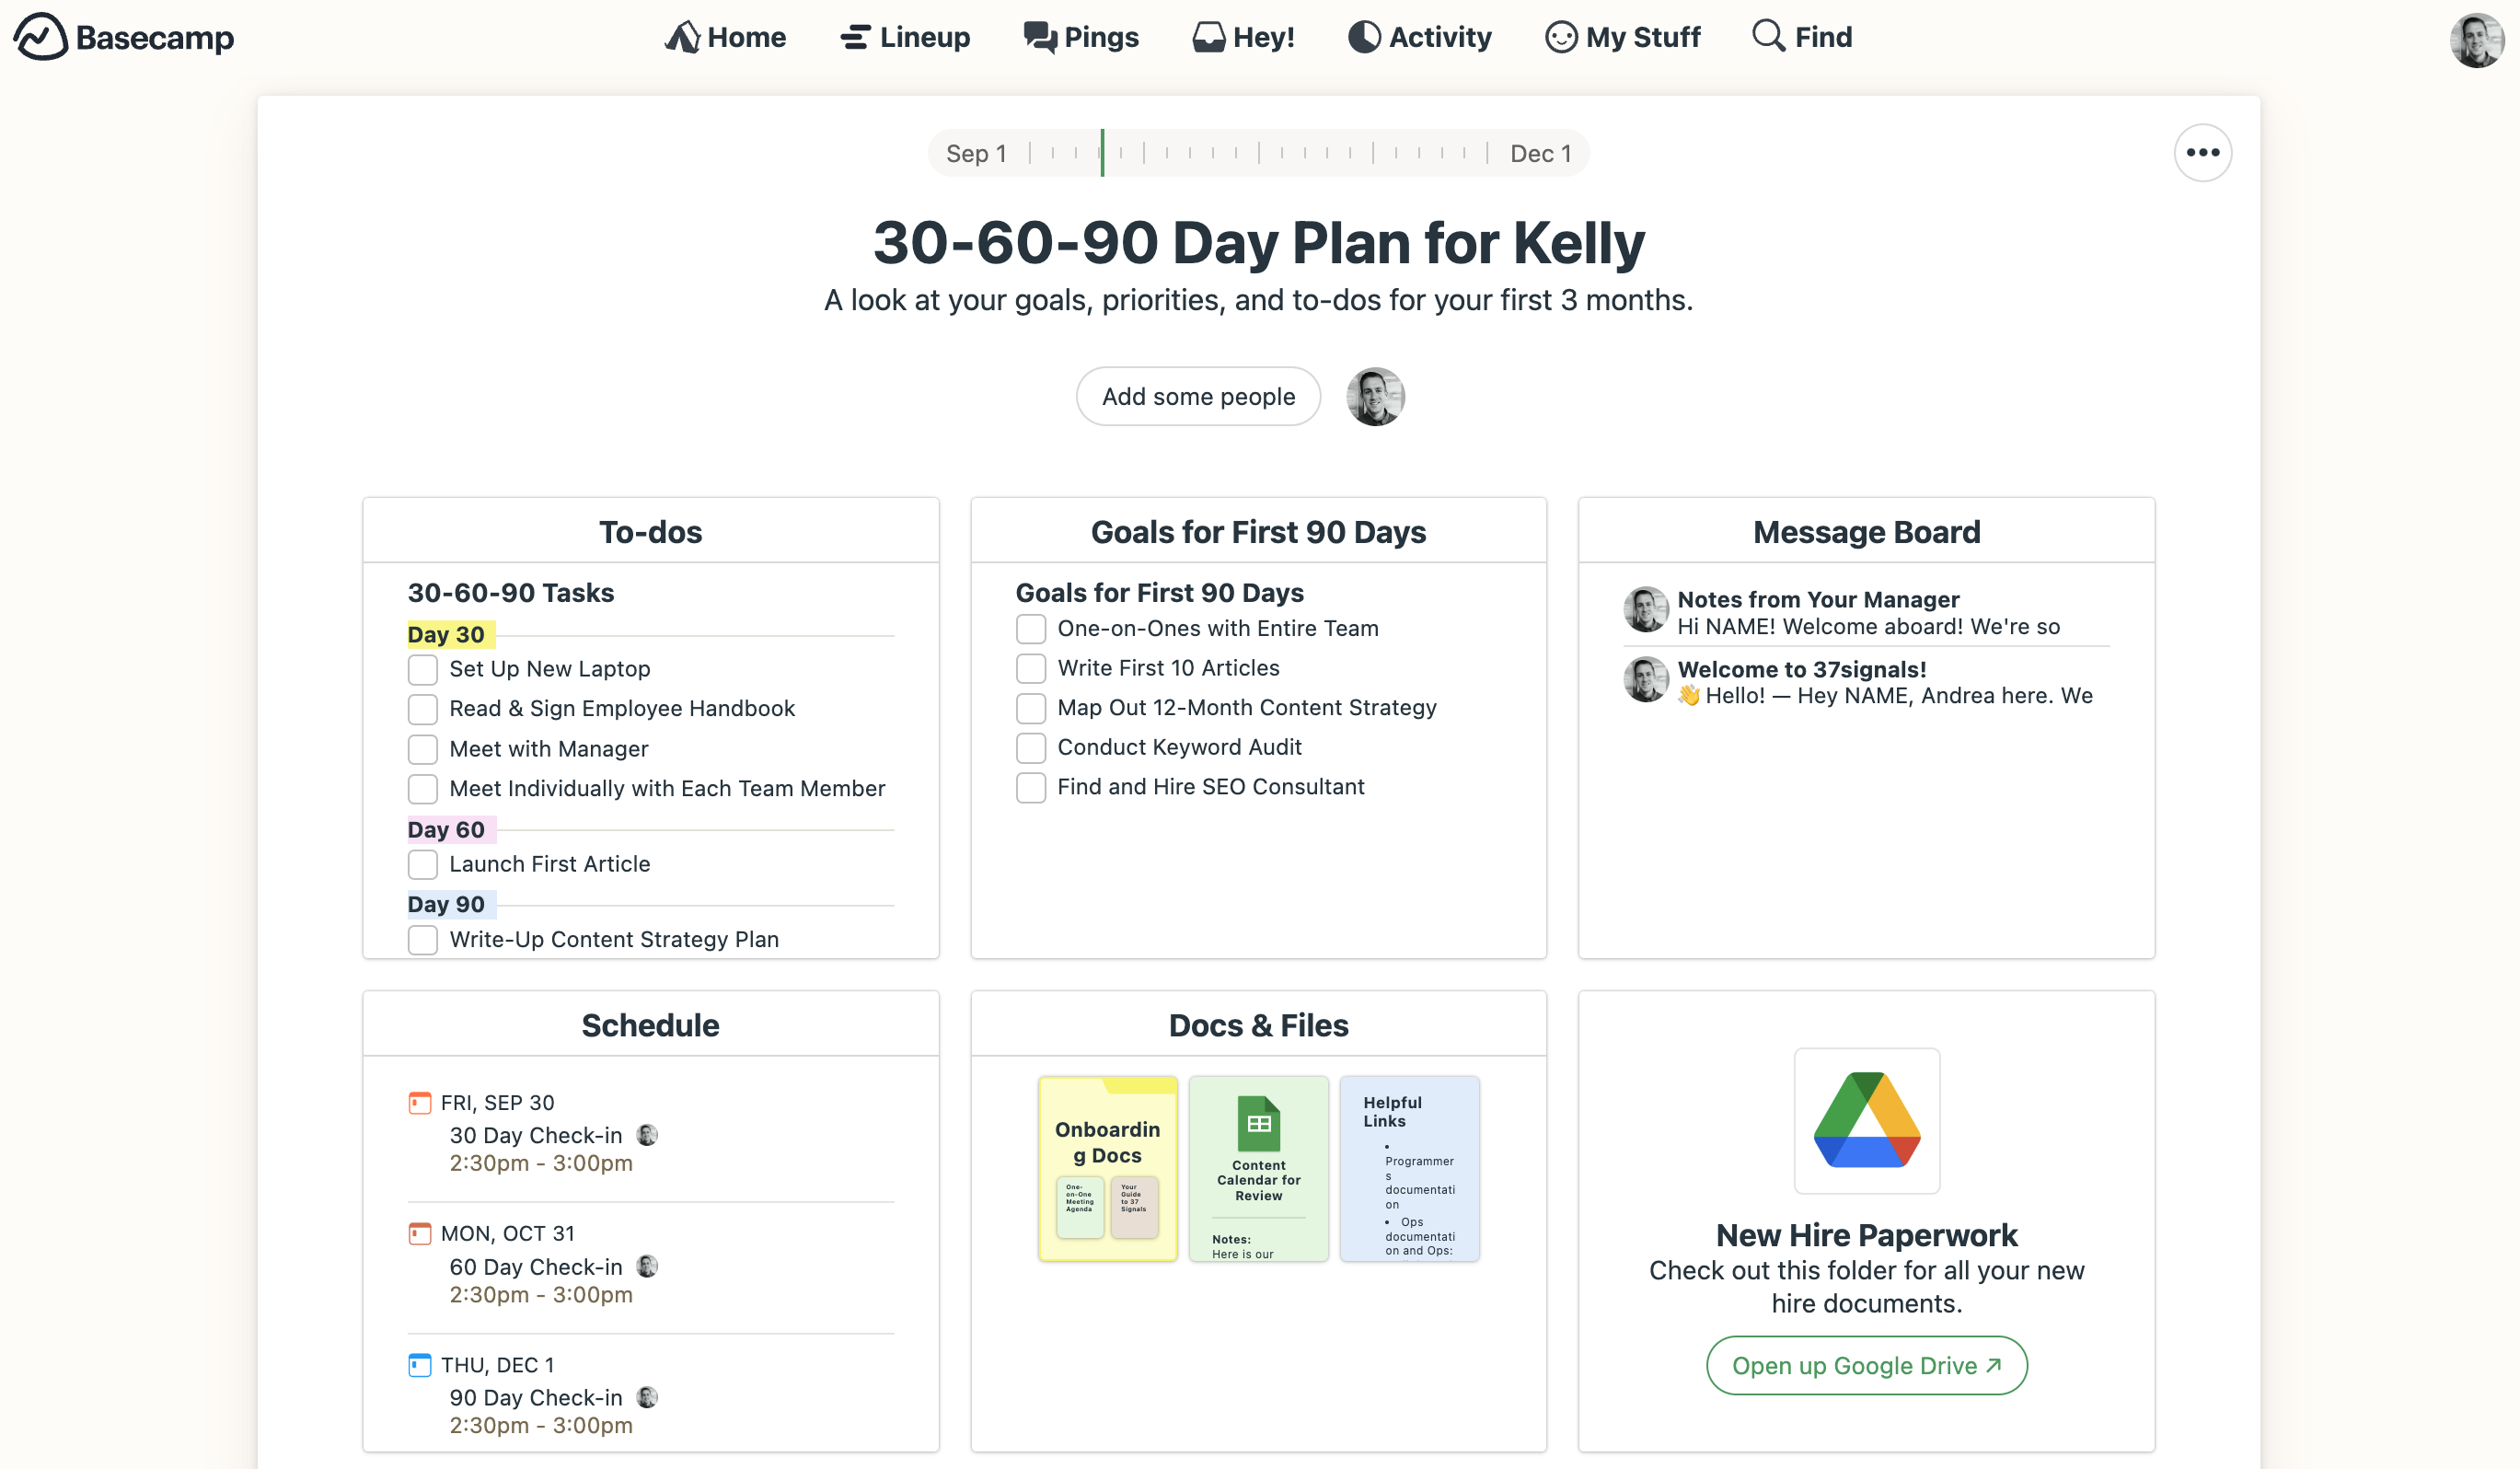 A look at the 30-60-90 Day Plan of a typical new employee.